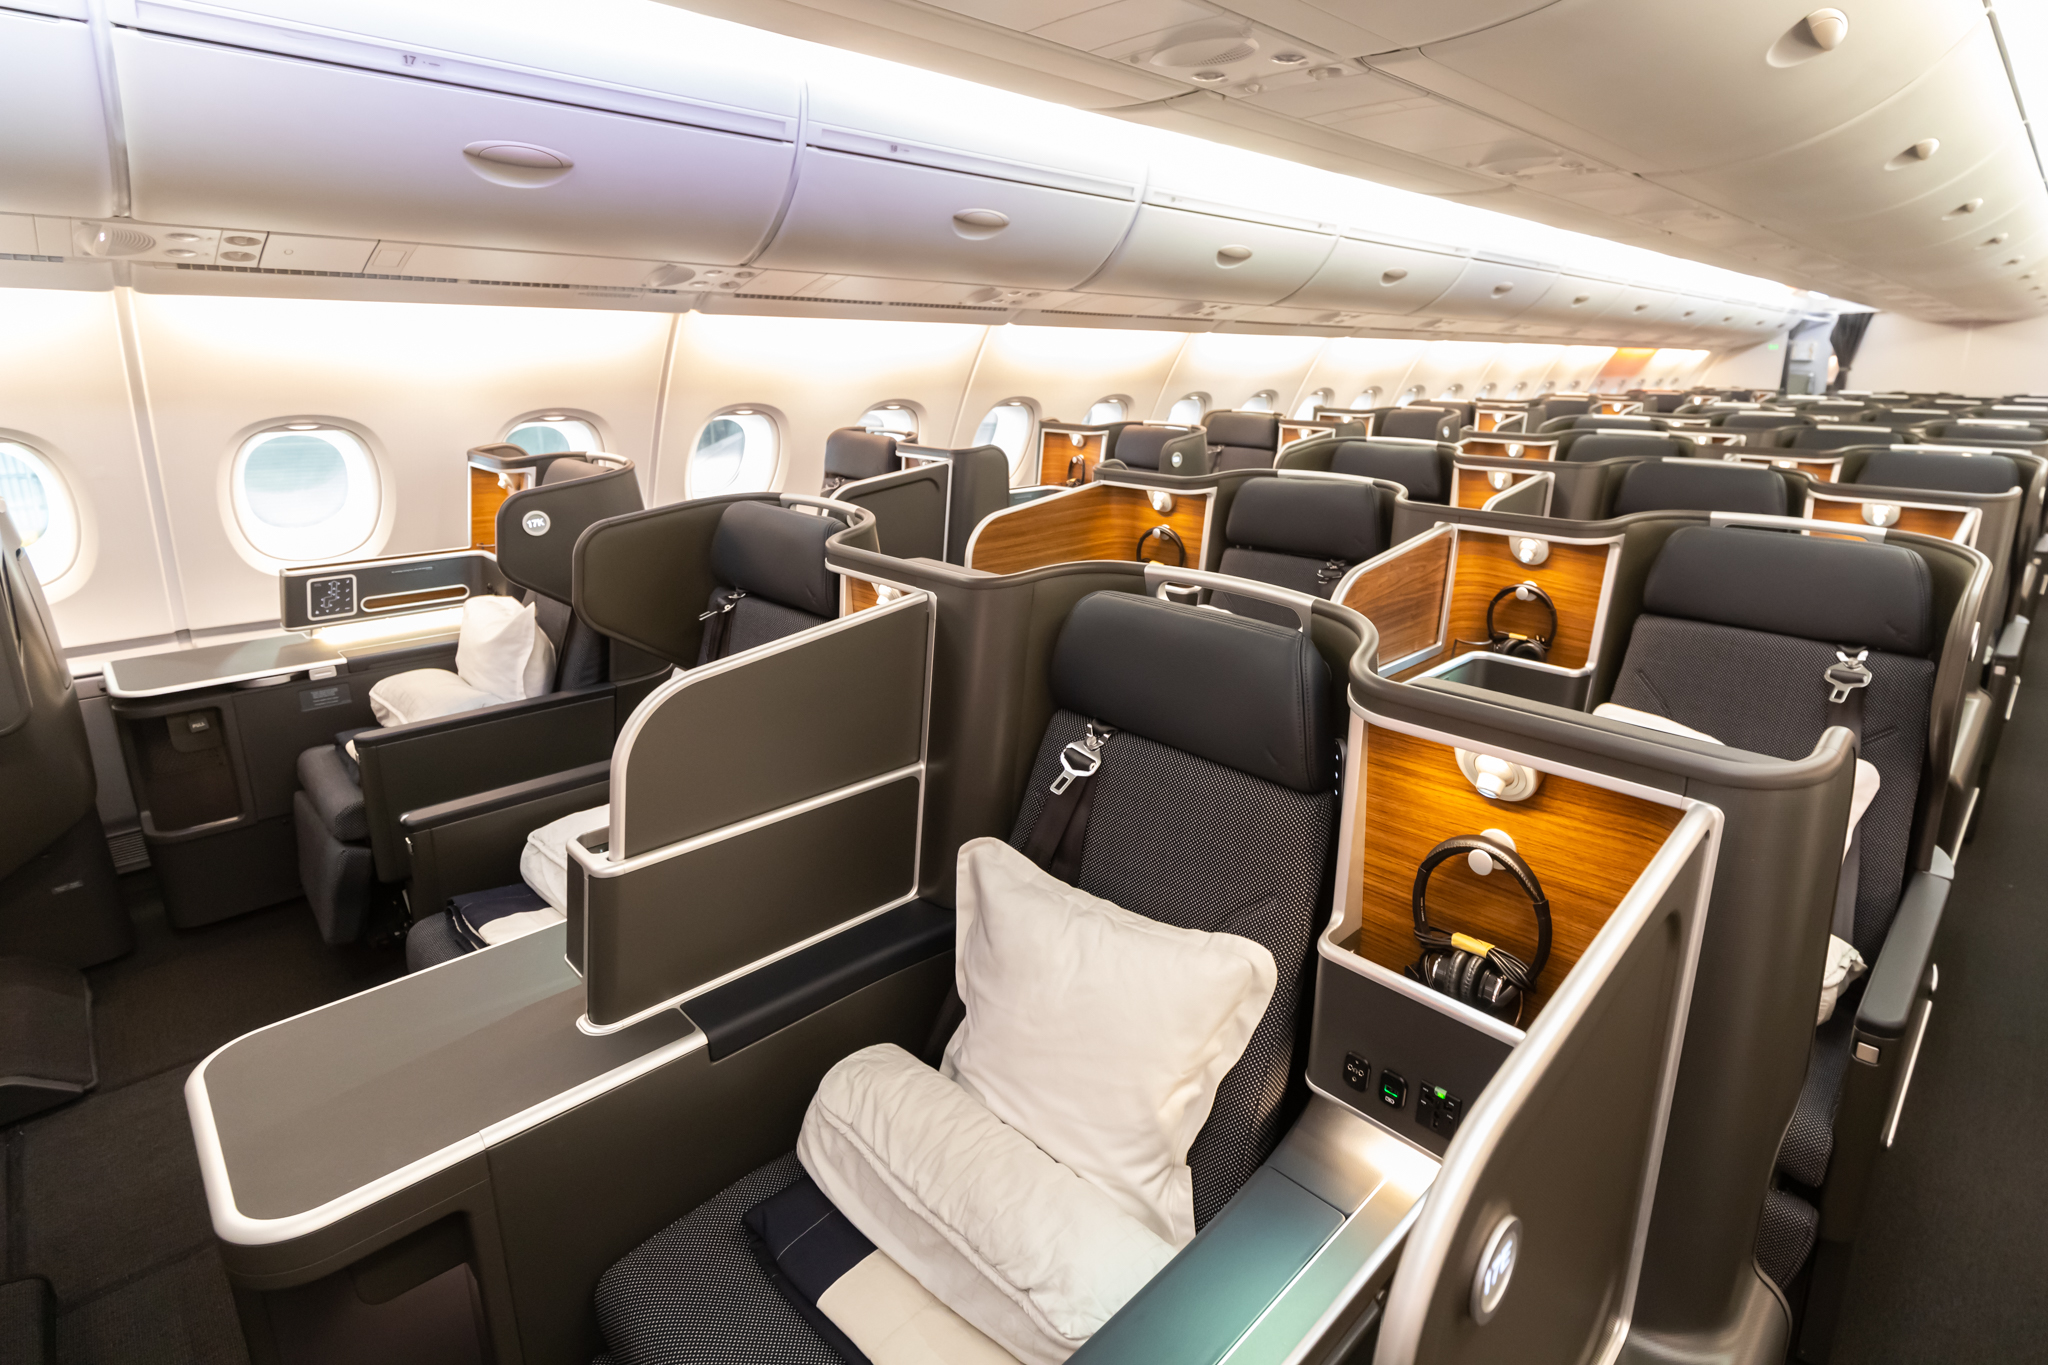 Up Close And Personal With Qantas' New A380 Cabins - Points From The Pacific